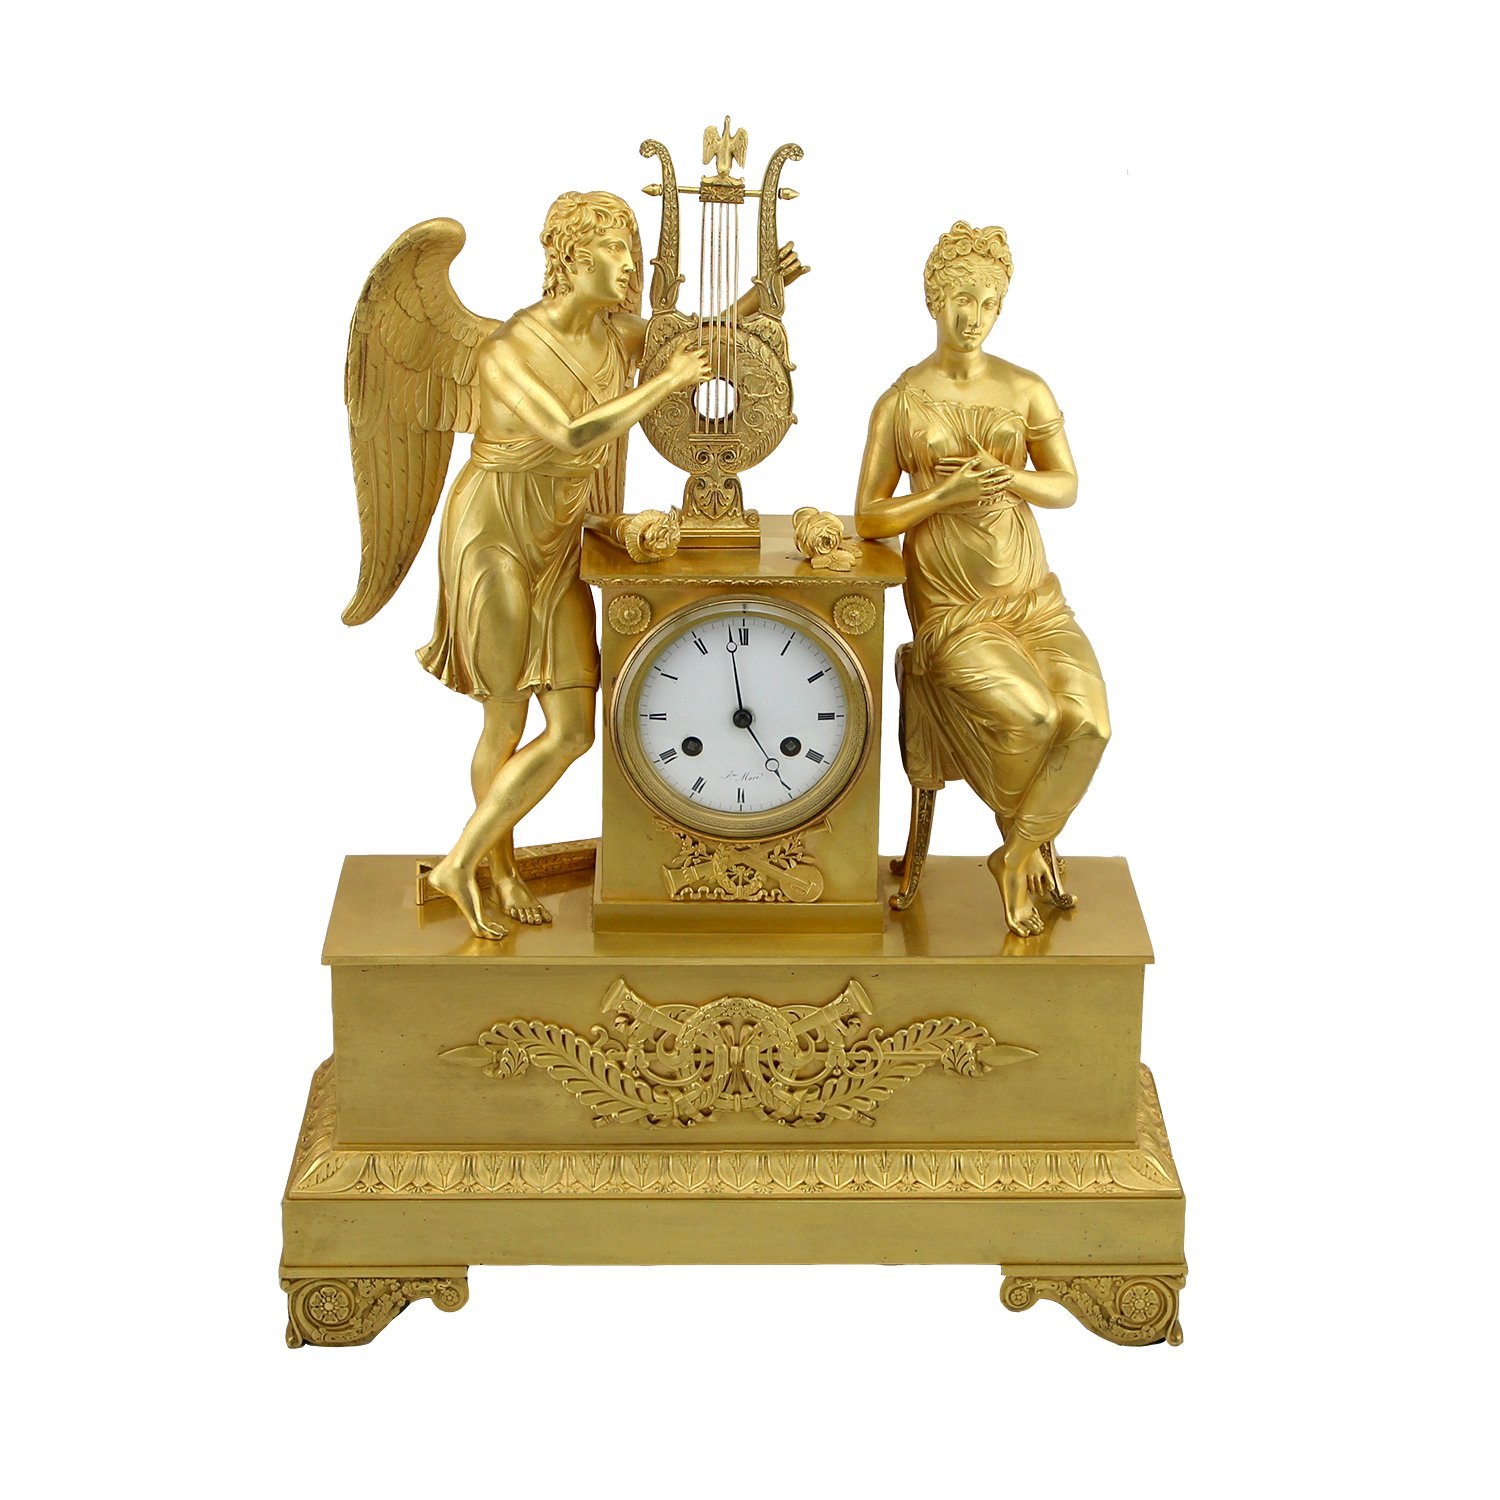 French Empire Gilt Bronze Mantle Clock Depicting Cupid and Psyche, Circa 1840